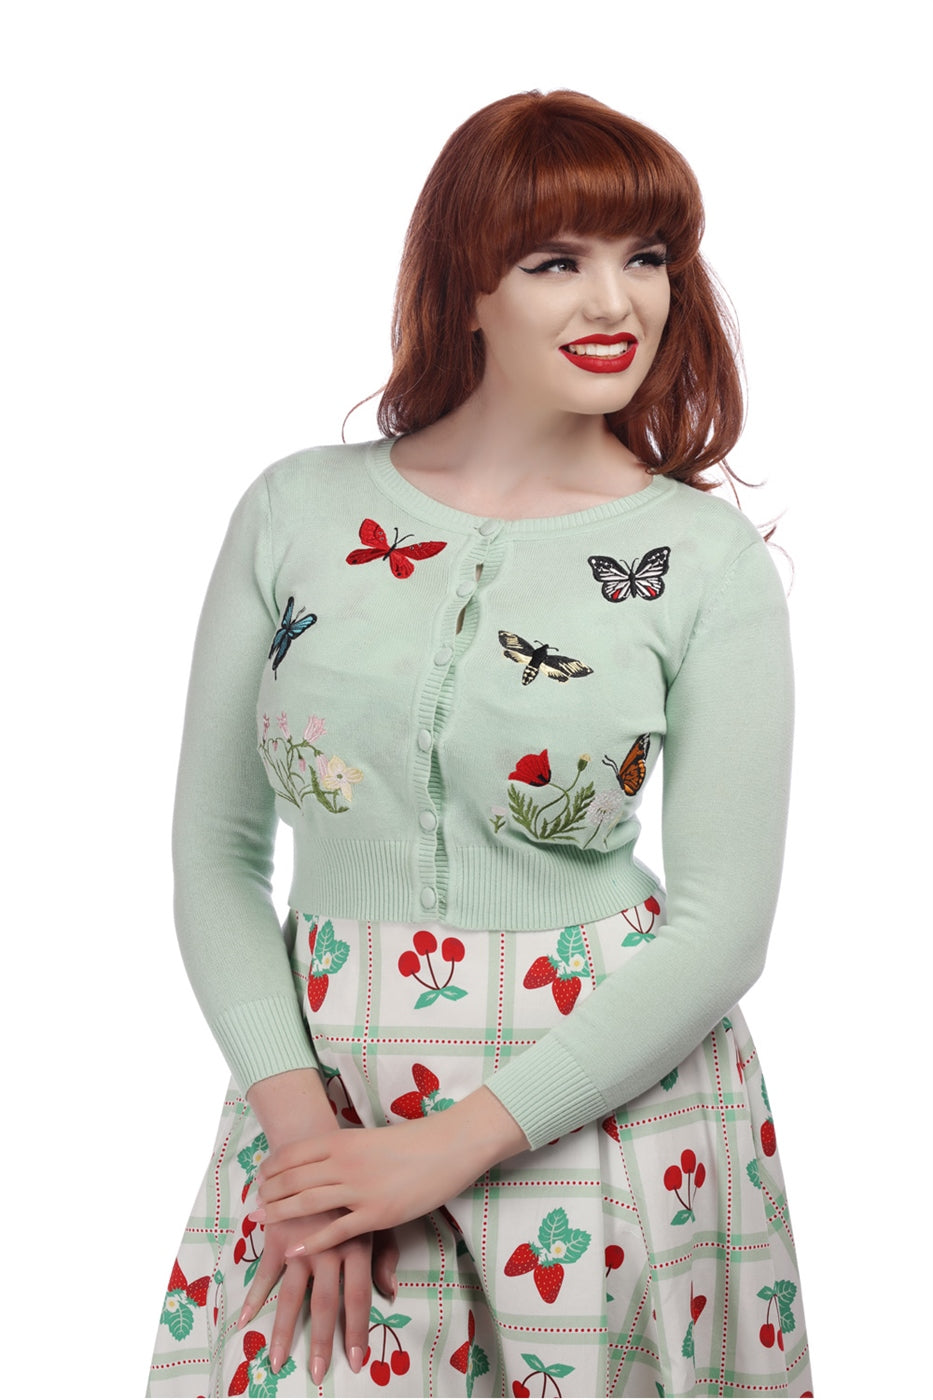 pretty vintage model smiling and wearing 50s inspired red lipstick and black eyeliner, a fruit print skirt and a mint green knitted cardigan with embroidered moths, butterflies and flowers